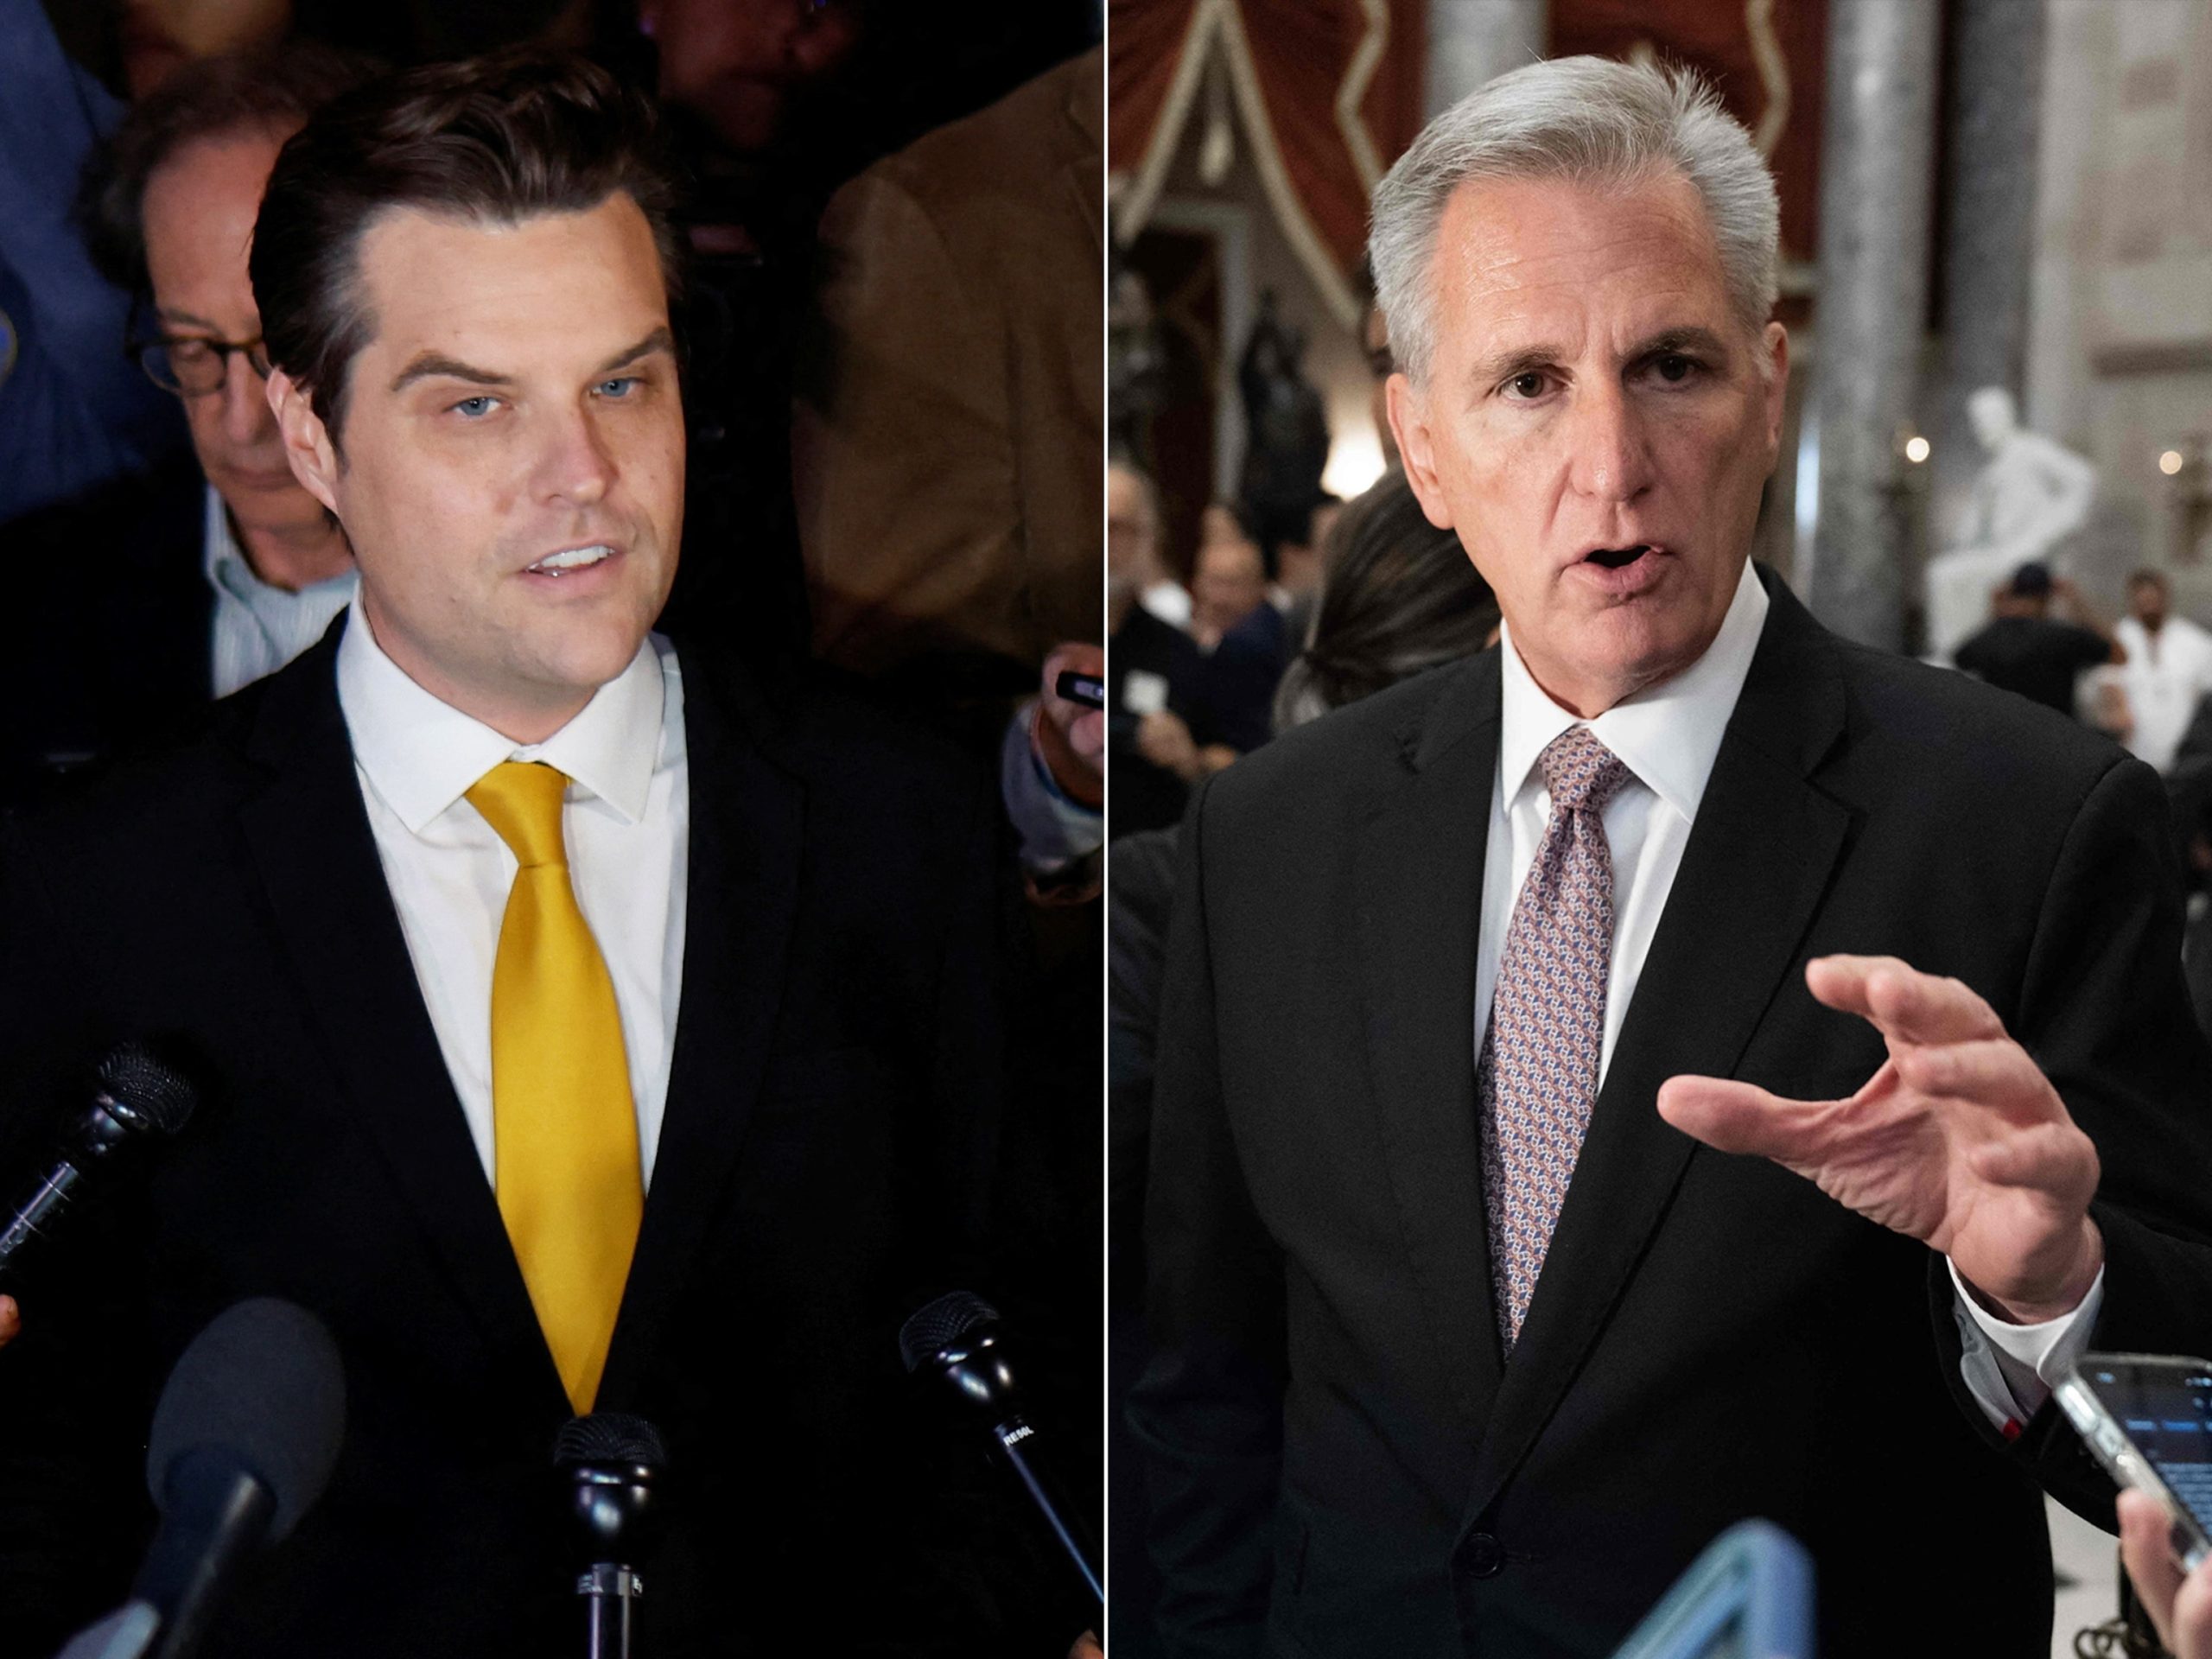 House Vote Scheduled for Tuesday on Gaetz's Motion to Remove Kevin McCarthy as Speaker